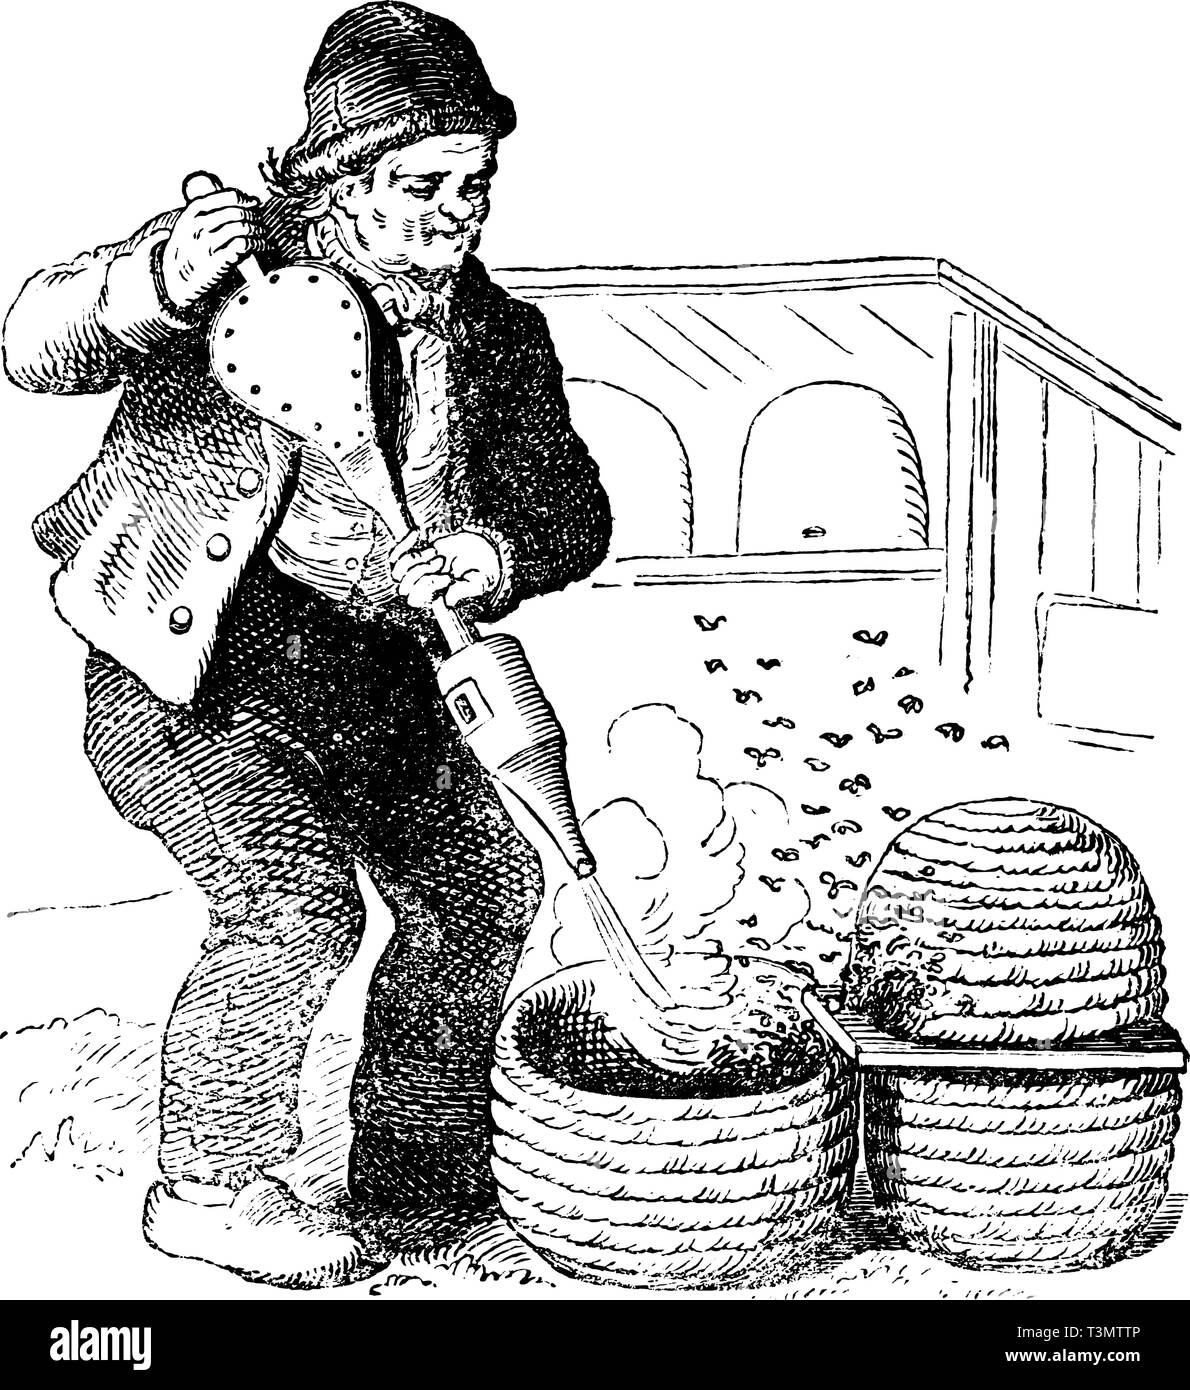 Antique vector drawing or engraving of grunge vintage illustration of beekeeper working with old style hive and smoker.From book Illustrierter Neuester Bienenfreund, printed in Leipzig, Germany 1852. Stock Vector